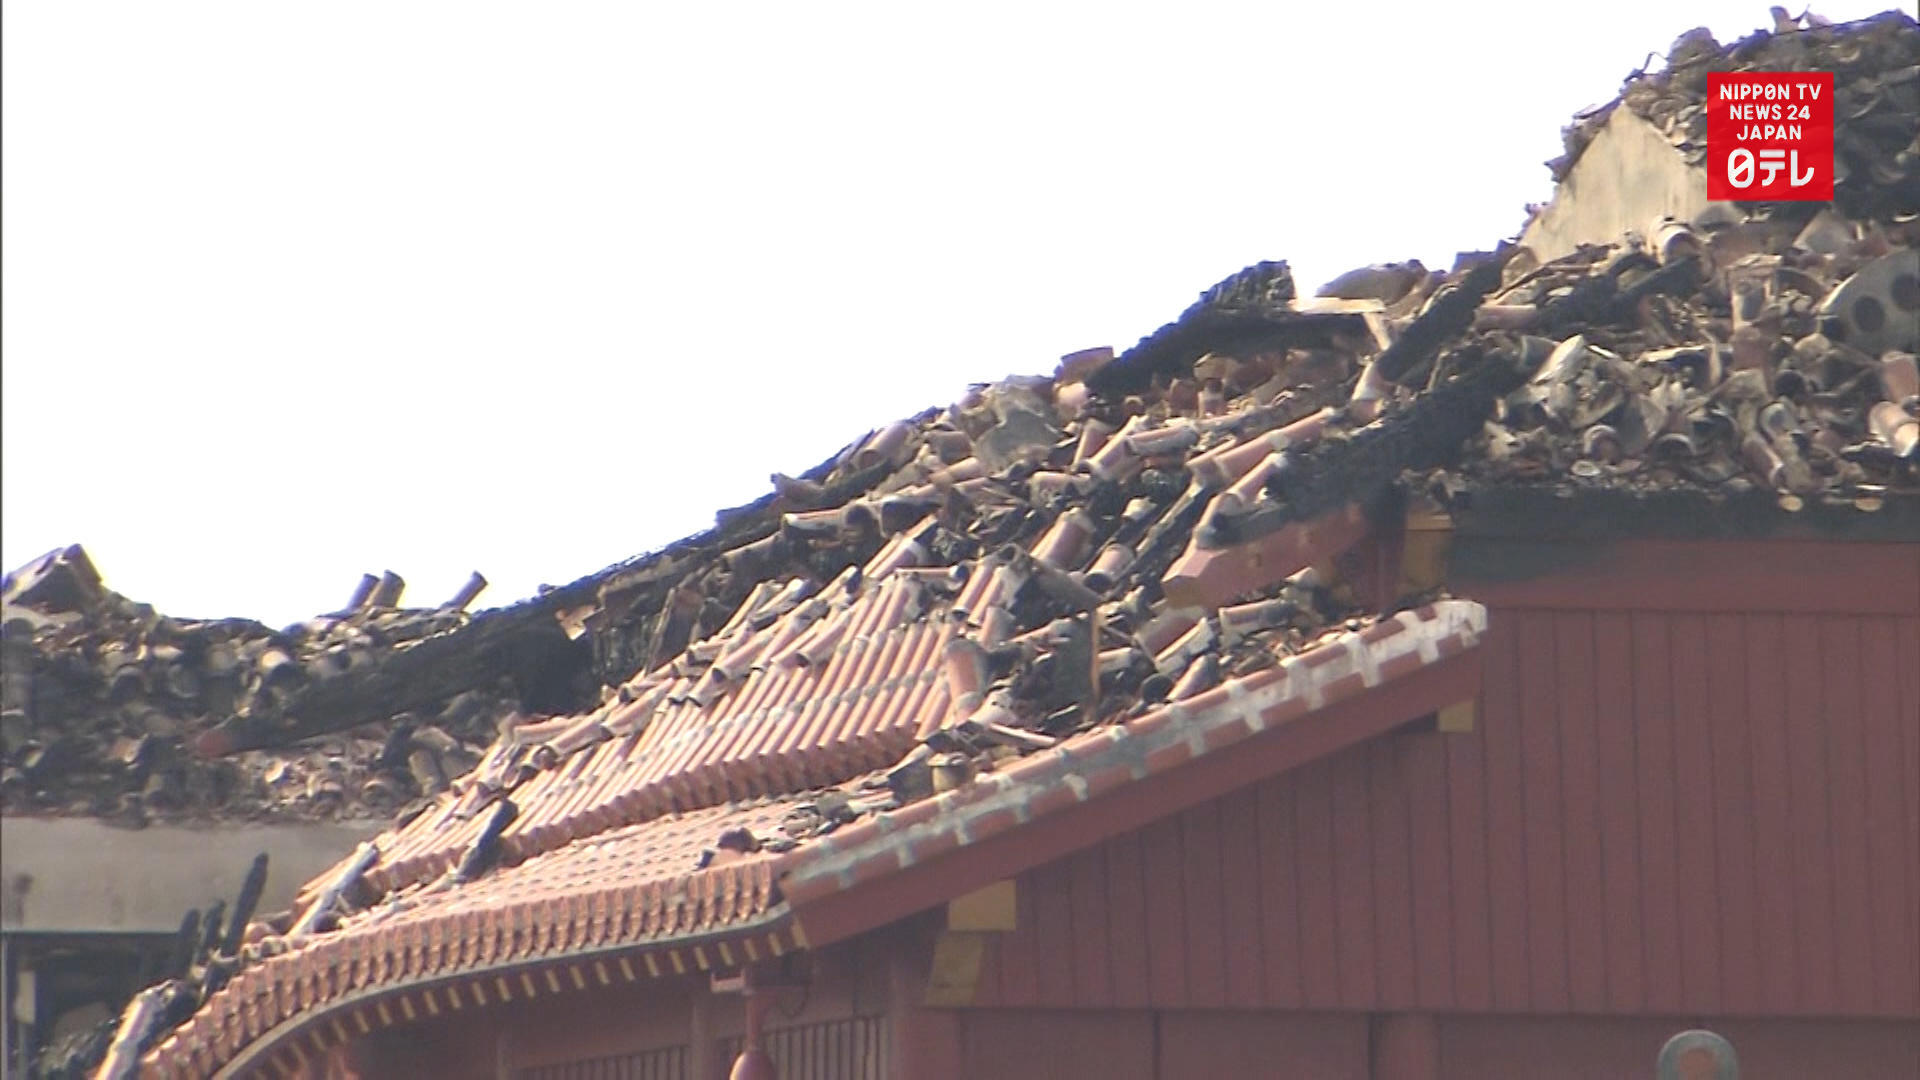 Shuri Castle roof tiles cannot be replaced